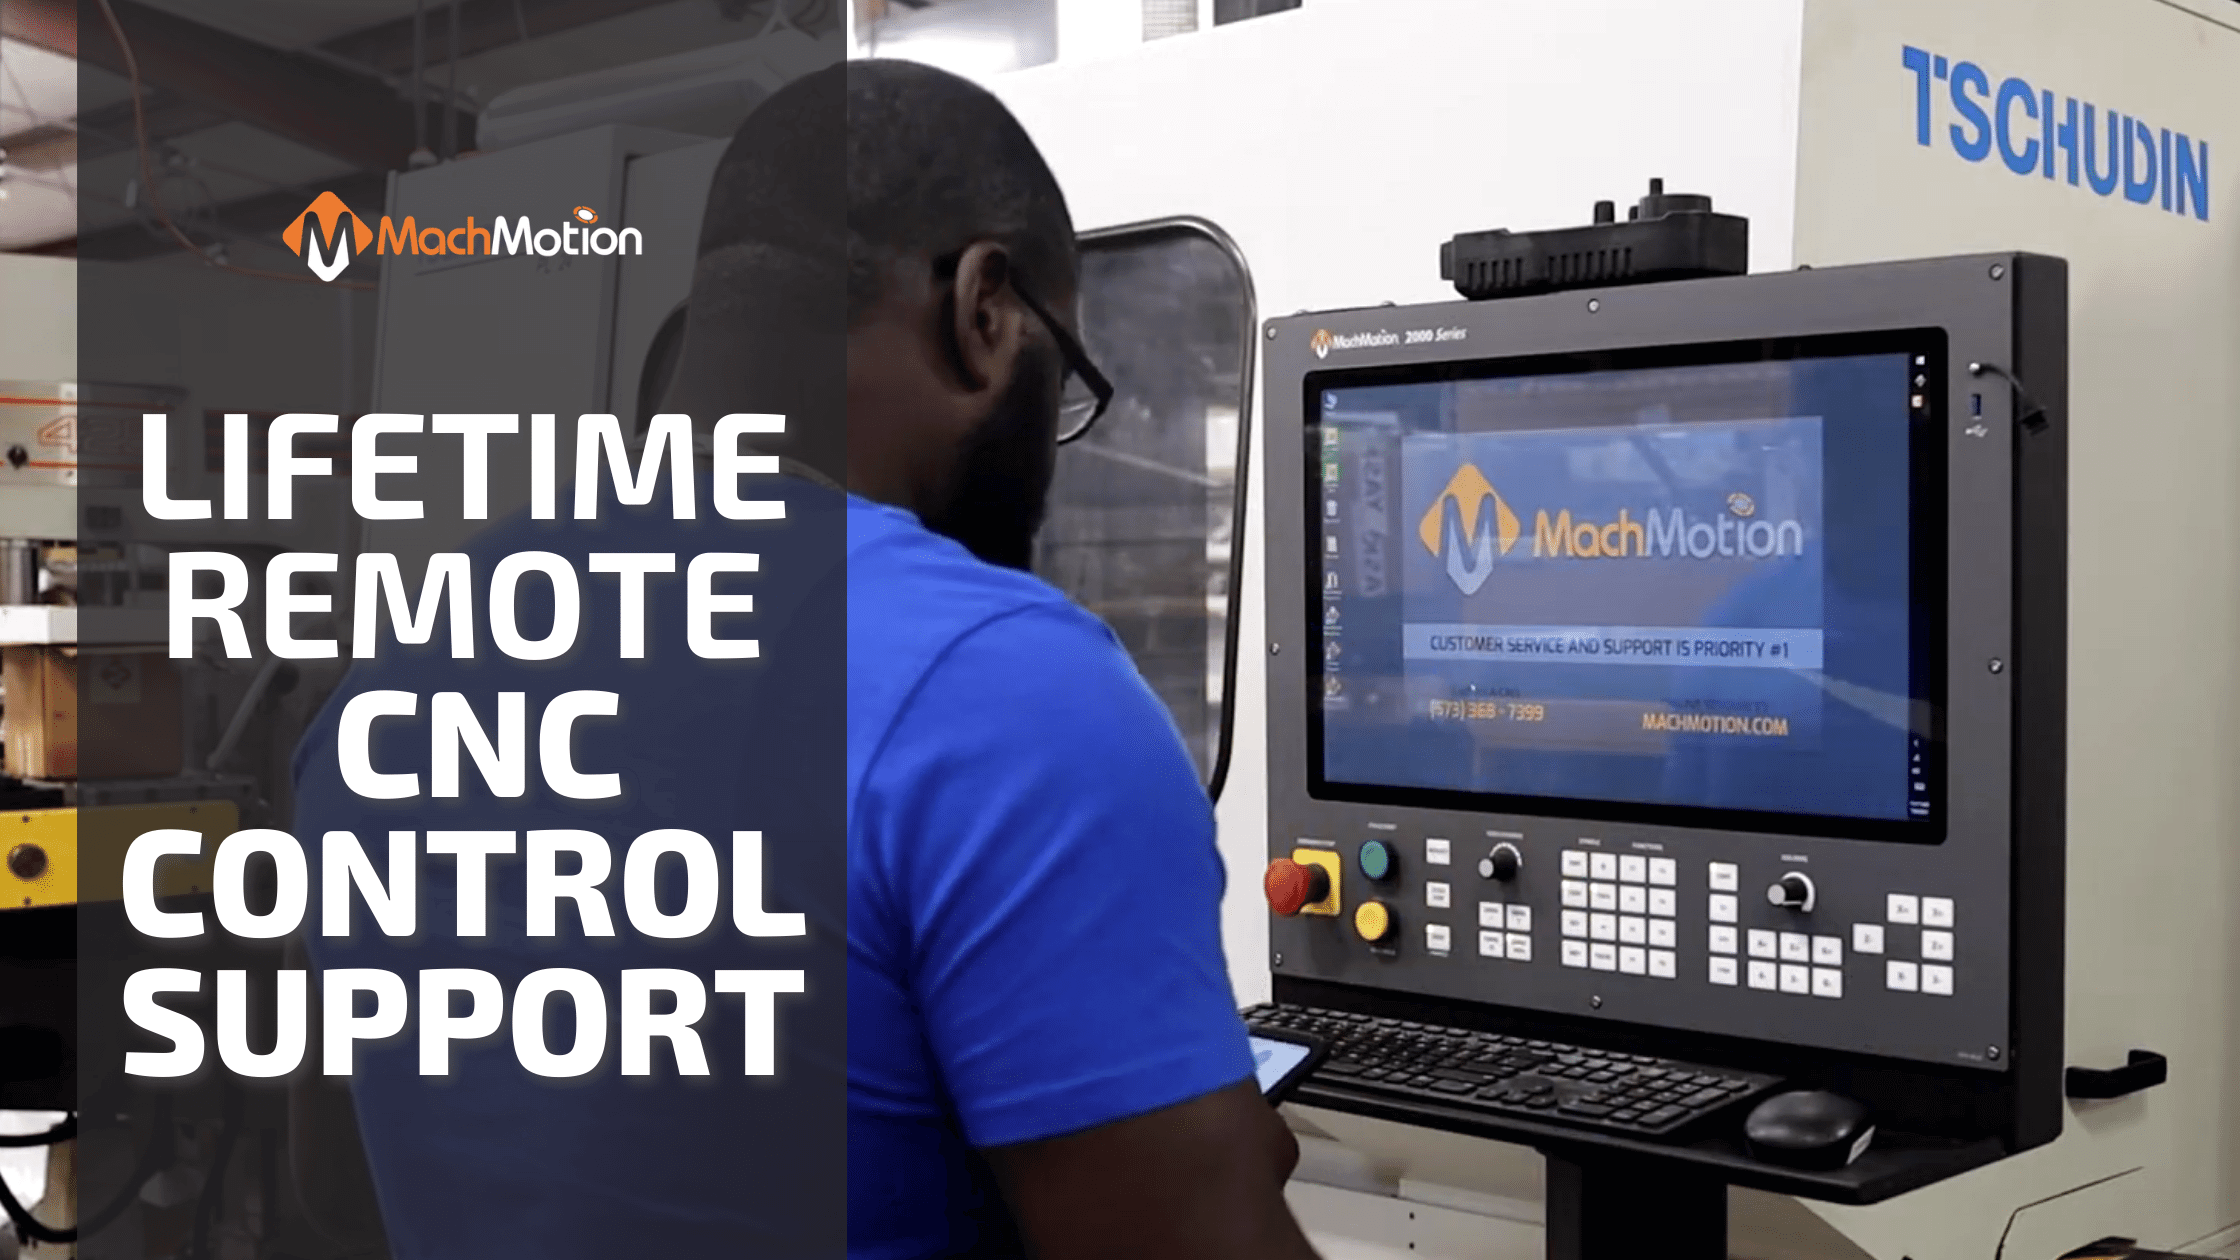 CNC Control Support With MachMotion